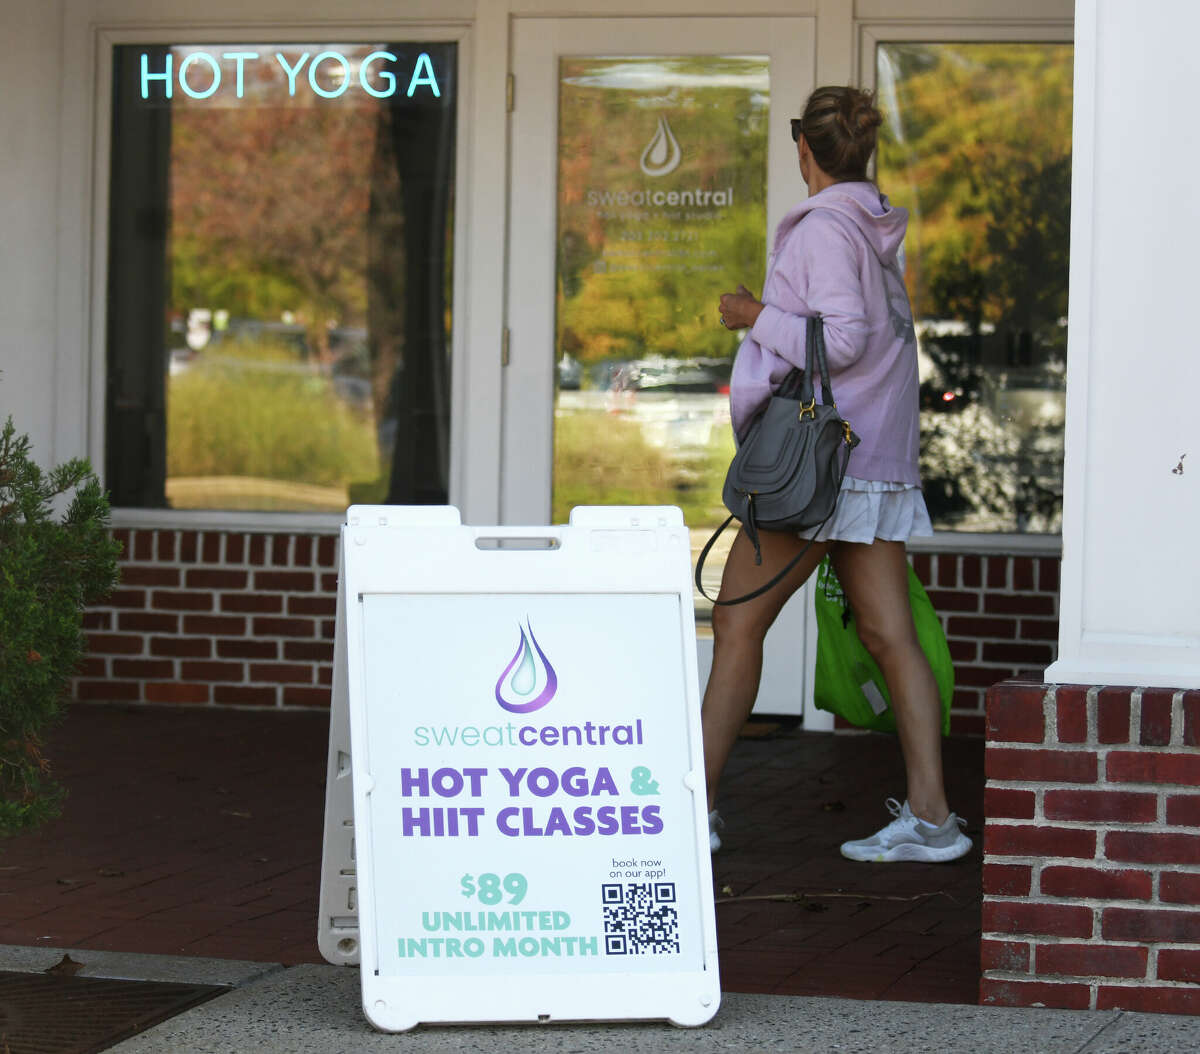 A sandwich board and neon sign are displayed outside Sweat Central yoga studio in Darien, Conn. Tuesday, Sept. 27, 2022. After relaxing the rules during the pandemic, Darien officials plan to resume enforcement of storefront regulations that prohibit banners, sandwich board signs, and signs on street posts.